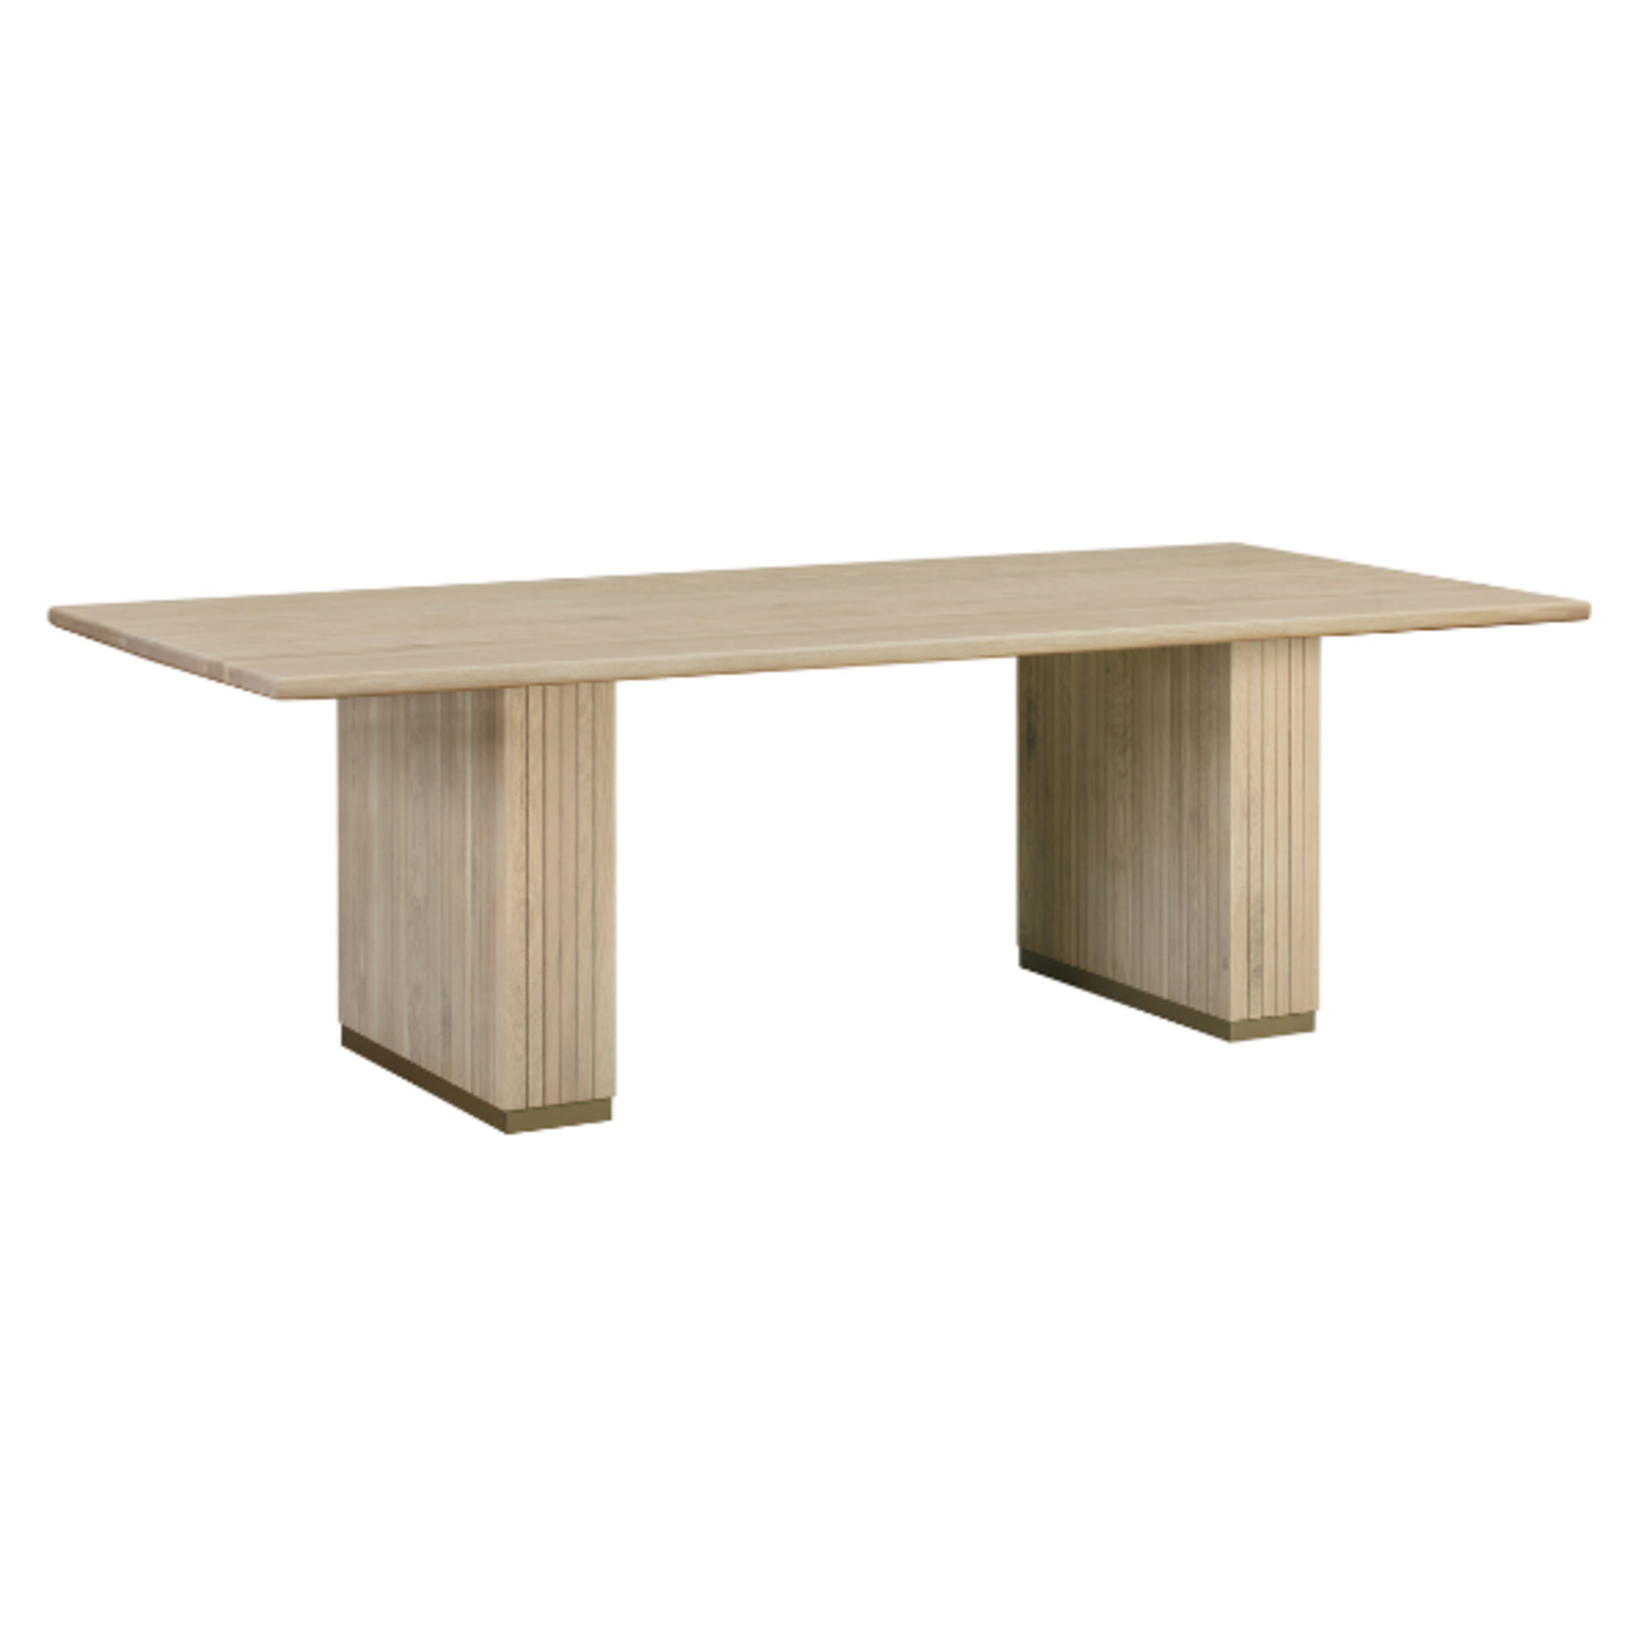 Tov CHELSEA ASH WOOD DINING TABLE